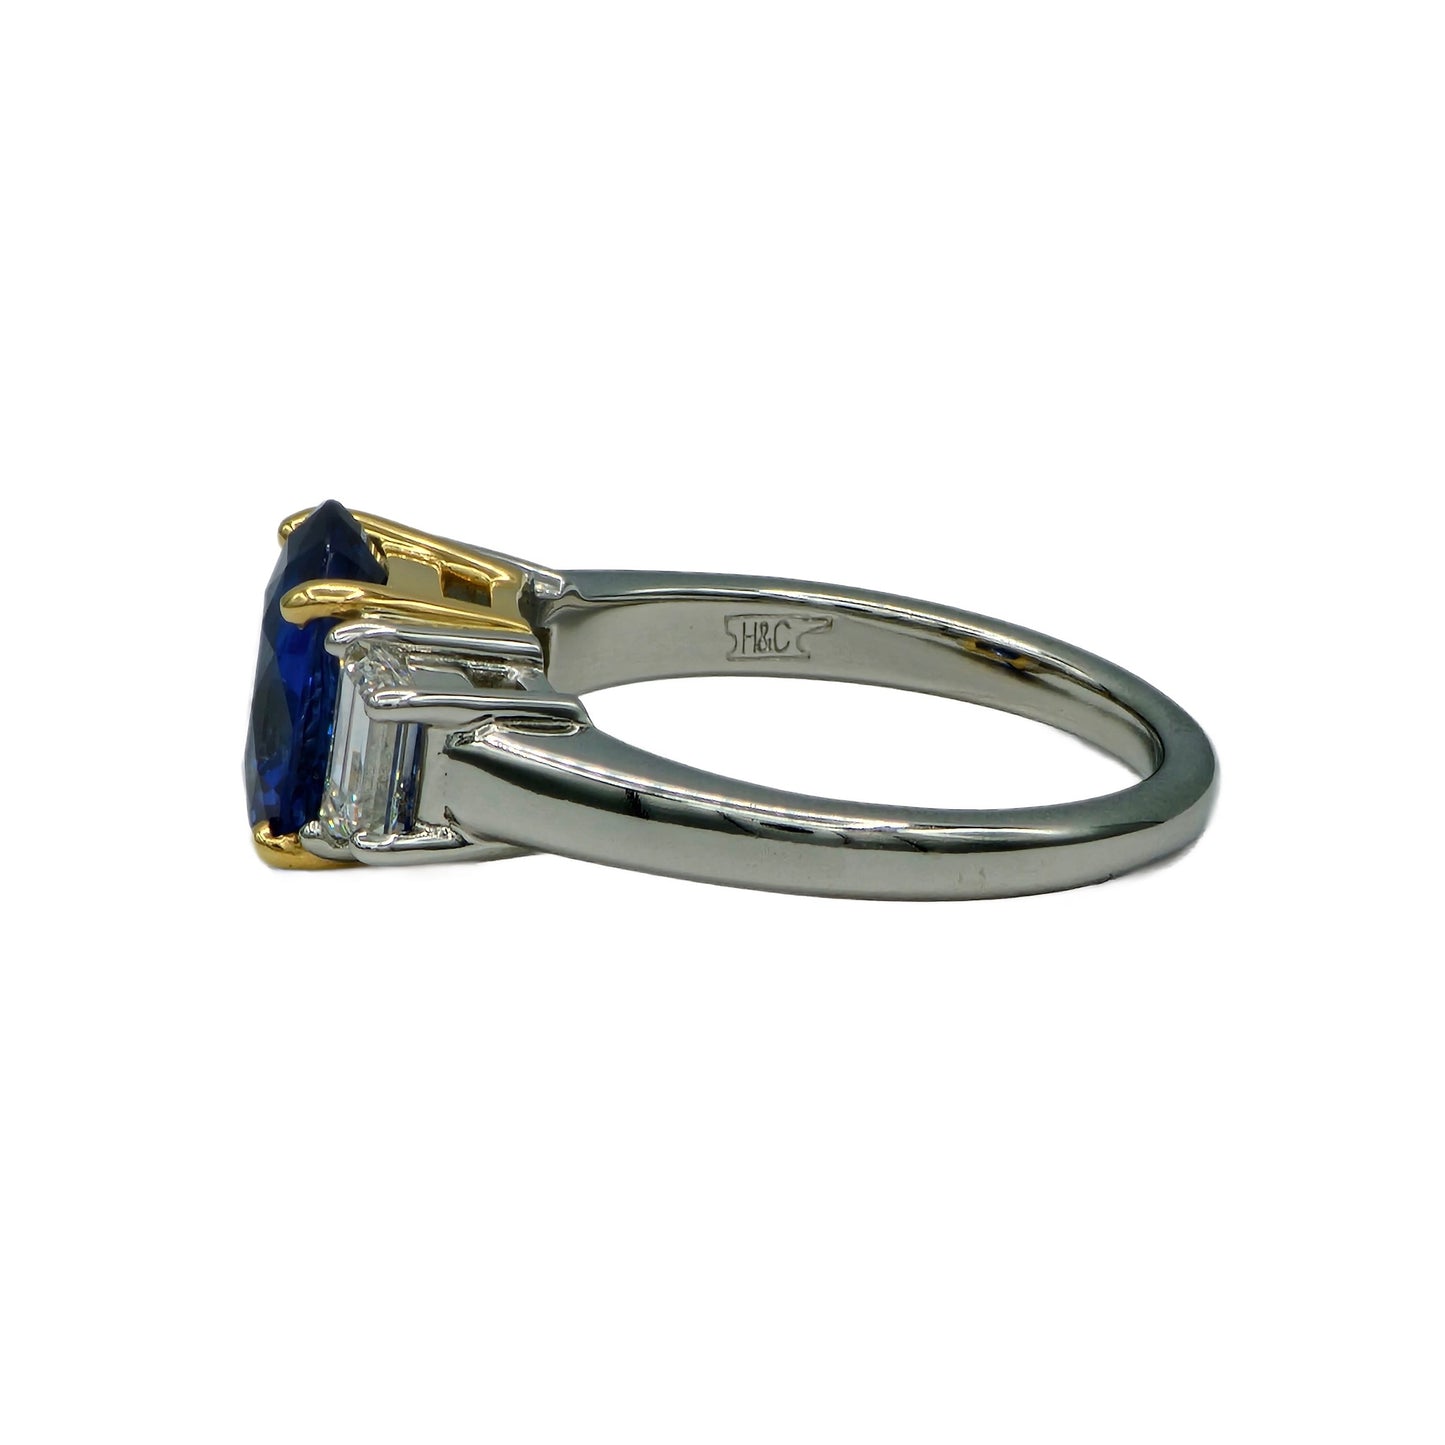 3.06 Carat Oval Blue Sapphire and 2=0.88 Carat Trapezoid Diamond Ring in Platinum